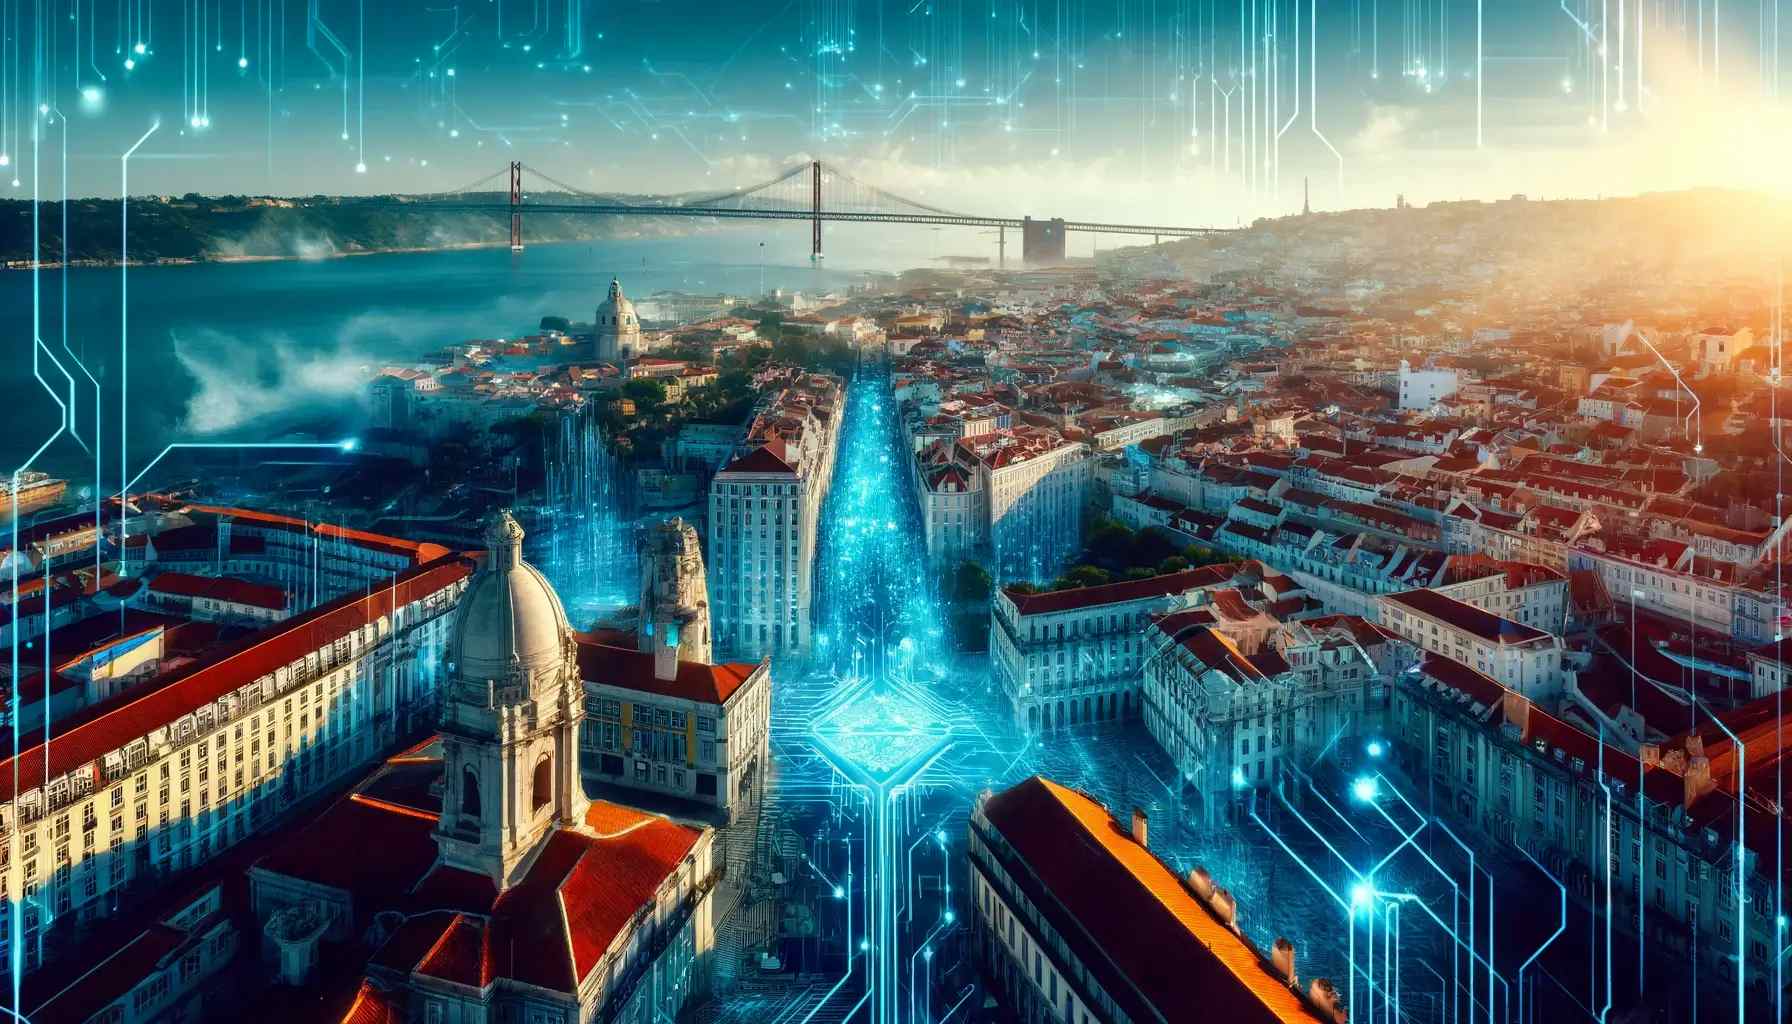 Background Tech Companies in Portugal